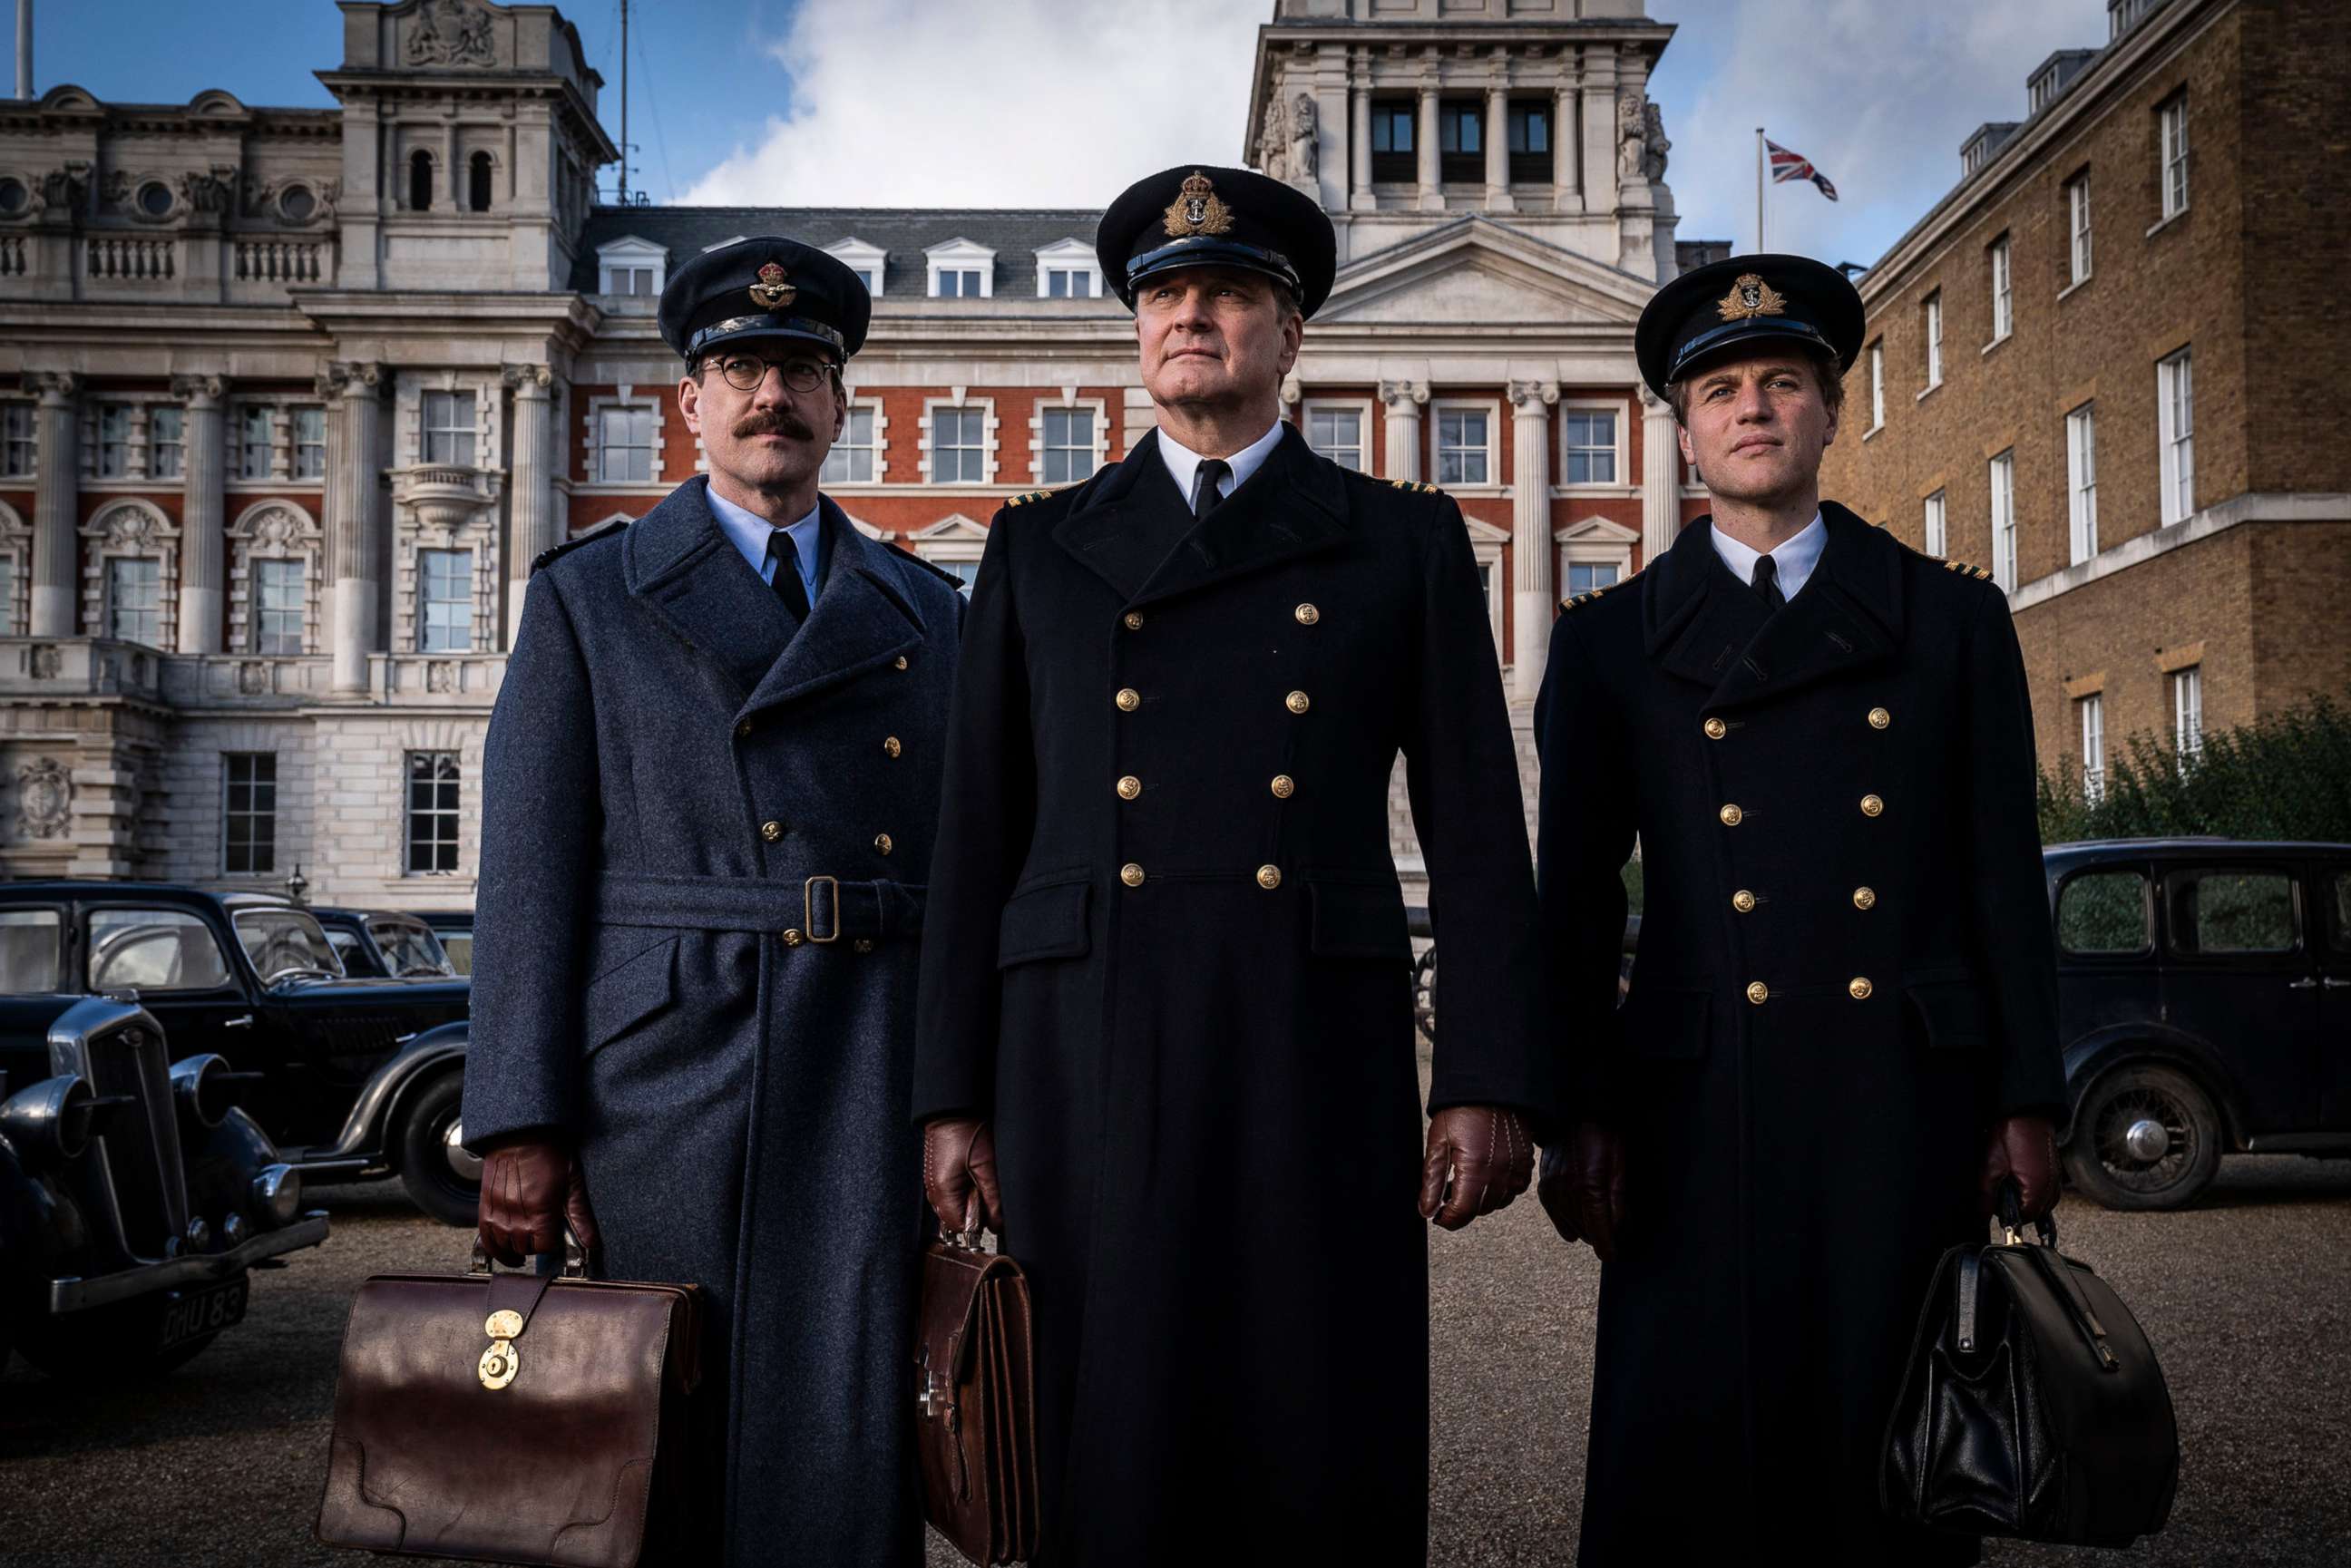 PHOTO: Matthew Macfadyen as Charles Cholmondeley, Colin Firth as Ewen Montagu and Johnny Flynn as Ian Fleming in a scene from "Operation Mincemeat."